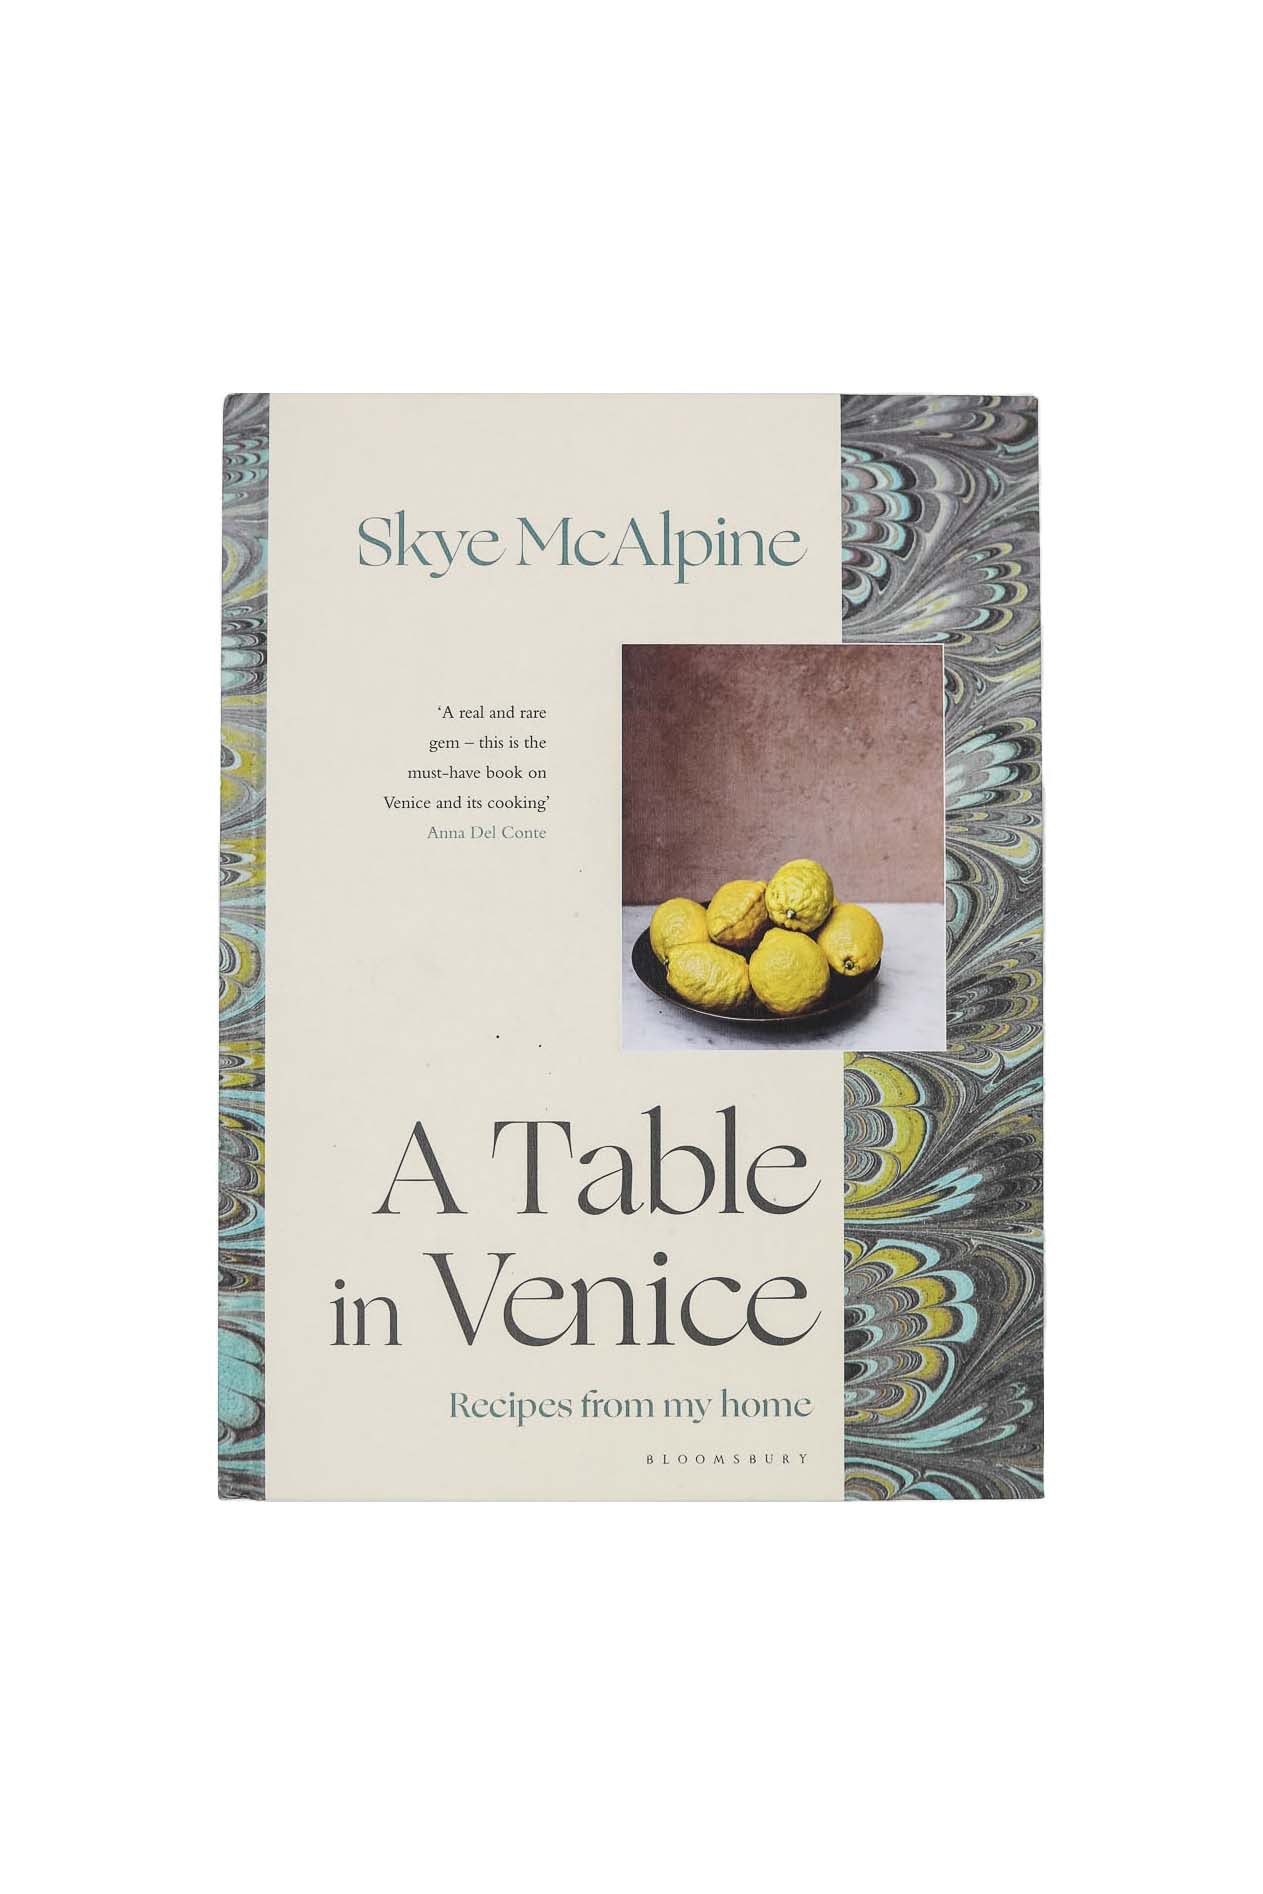 A Table in Venice, signed and gift wrapped - Skye McAlpine Tavola